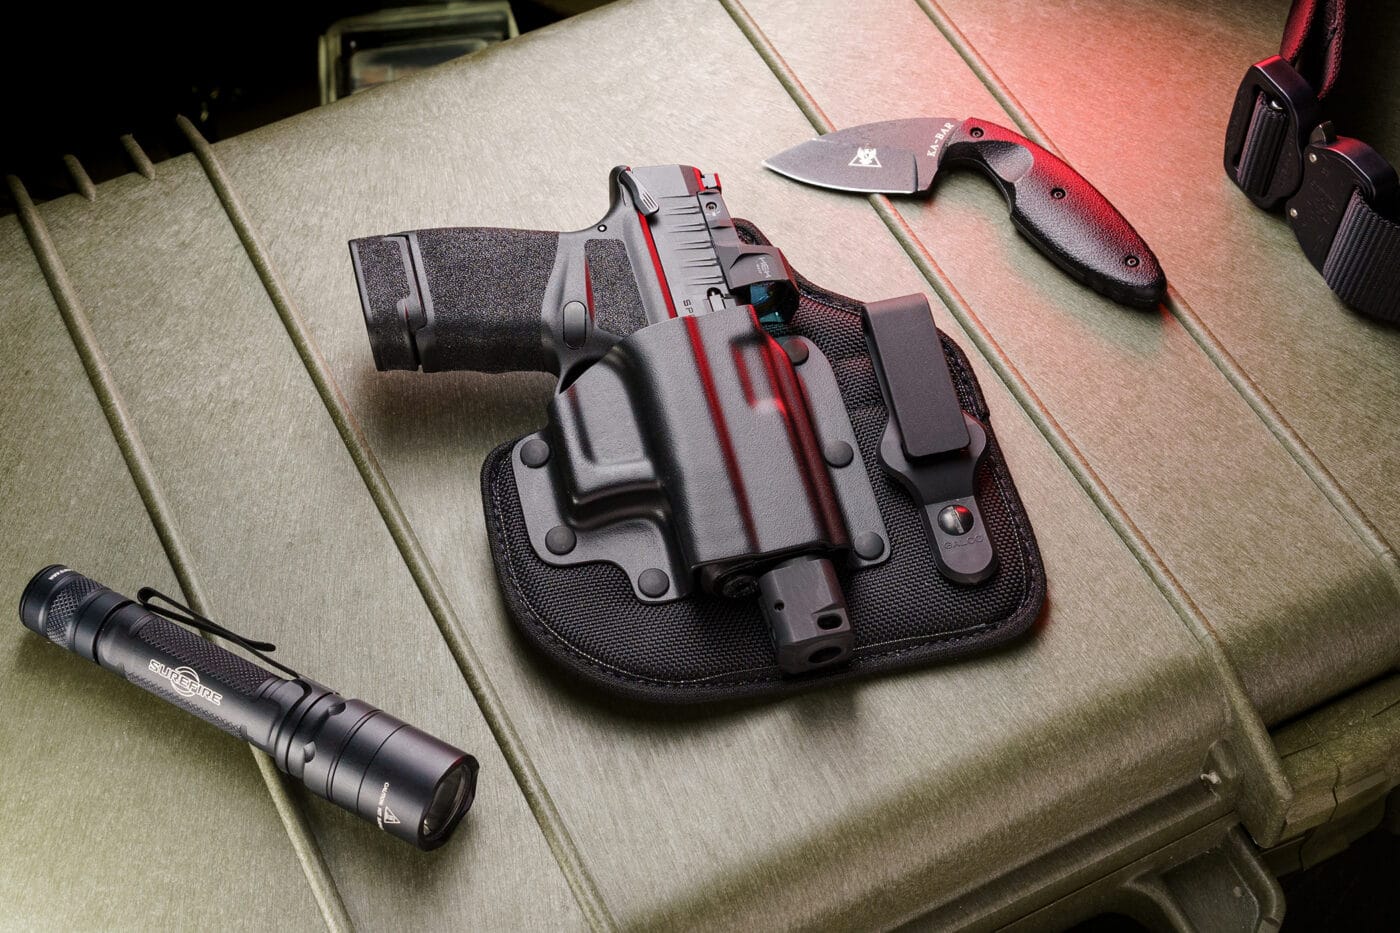 Galco QuickTuk Cloud holster with Hellcat RDP pistol in it